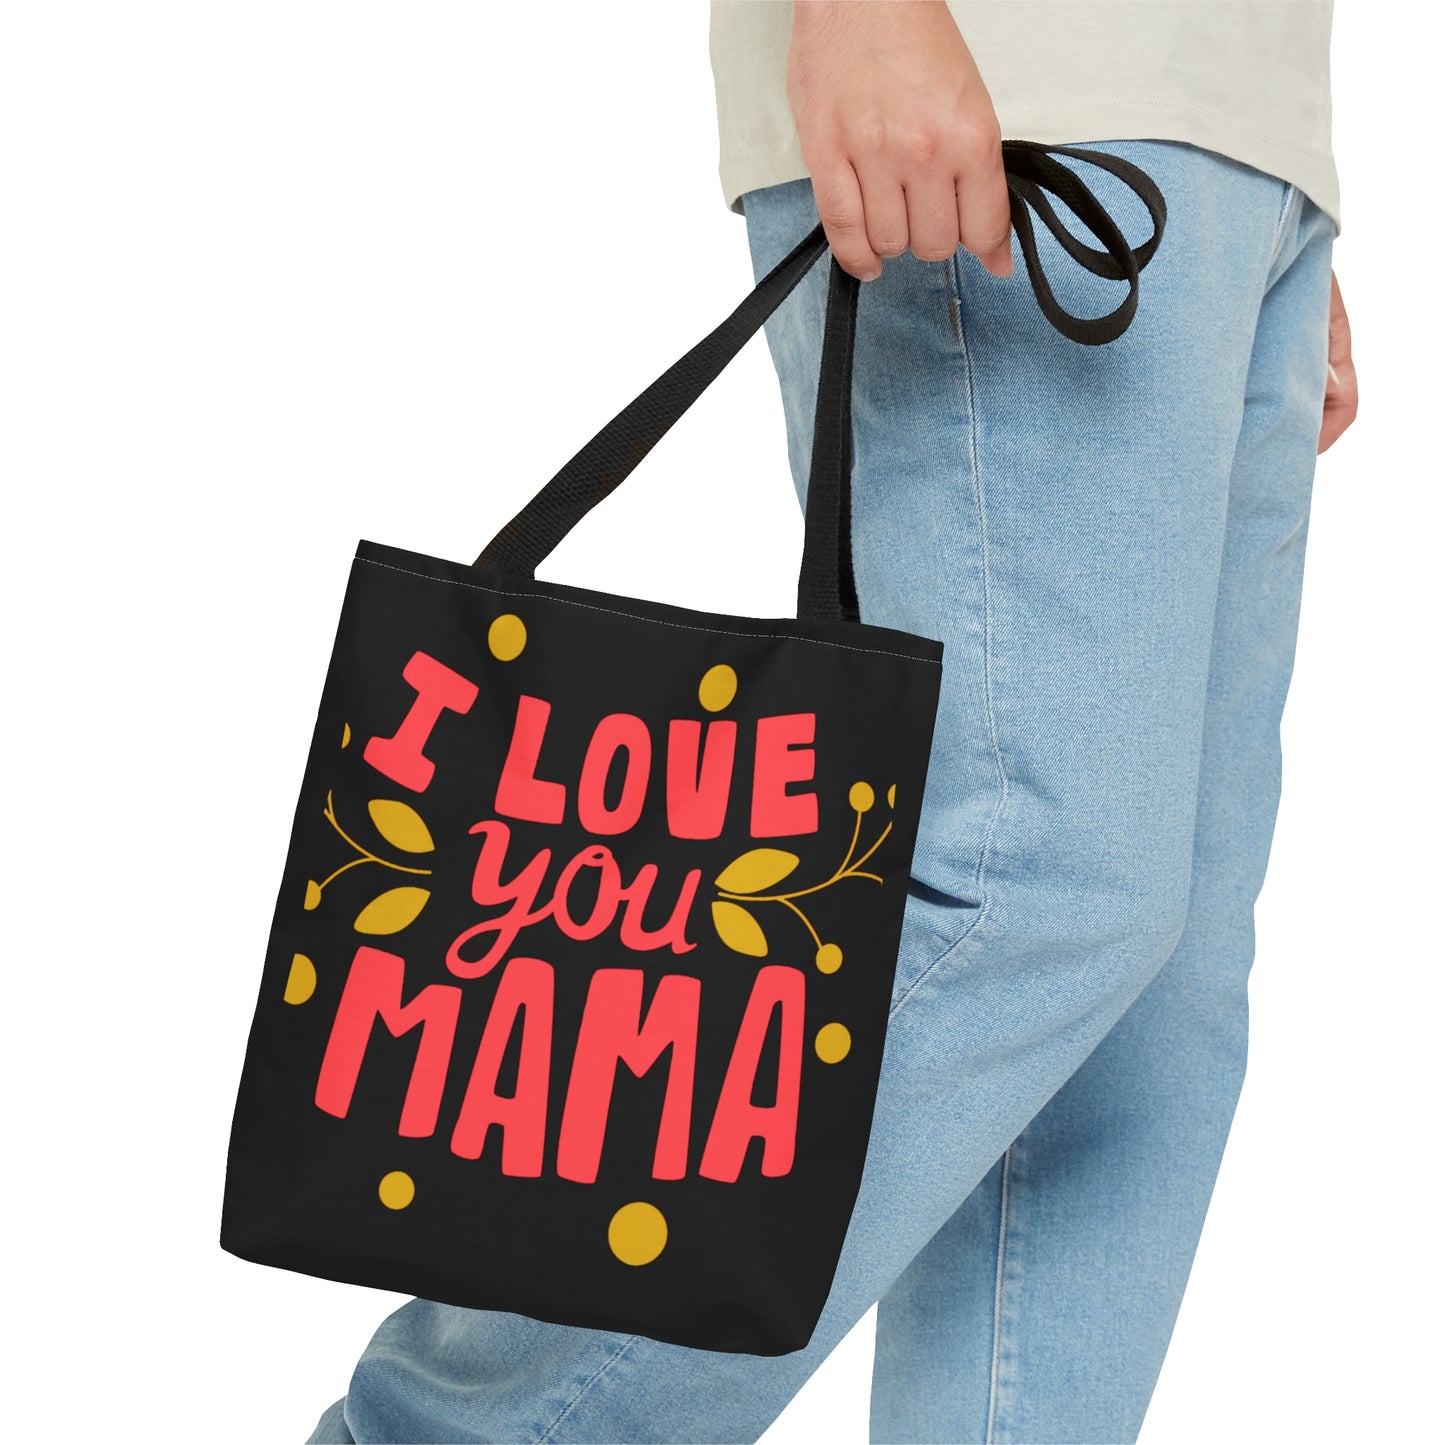 Let your Mama know you love her, don’t be shy. Make her day with this tote bag. Come in 3 sizes to meet her needs.